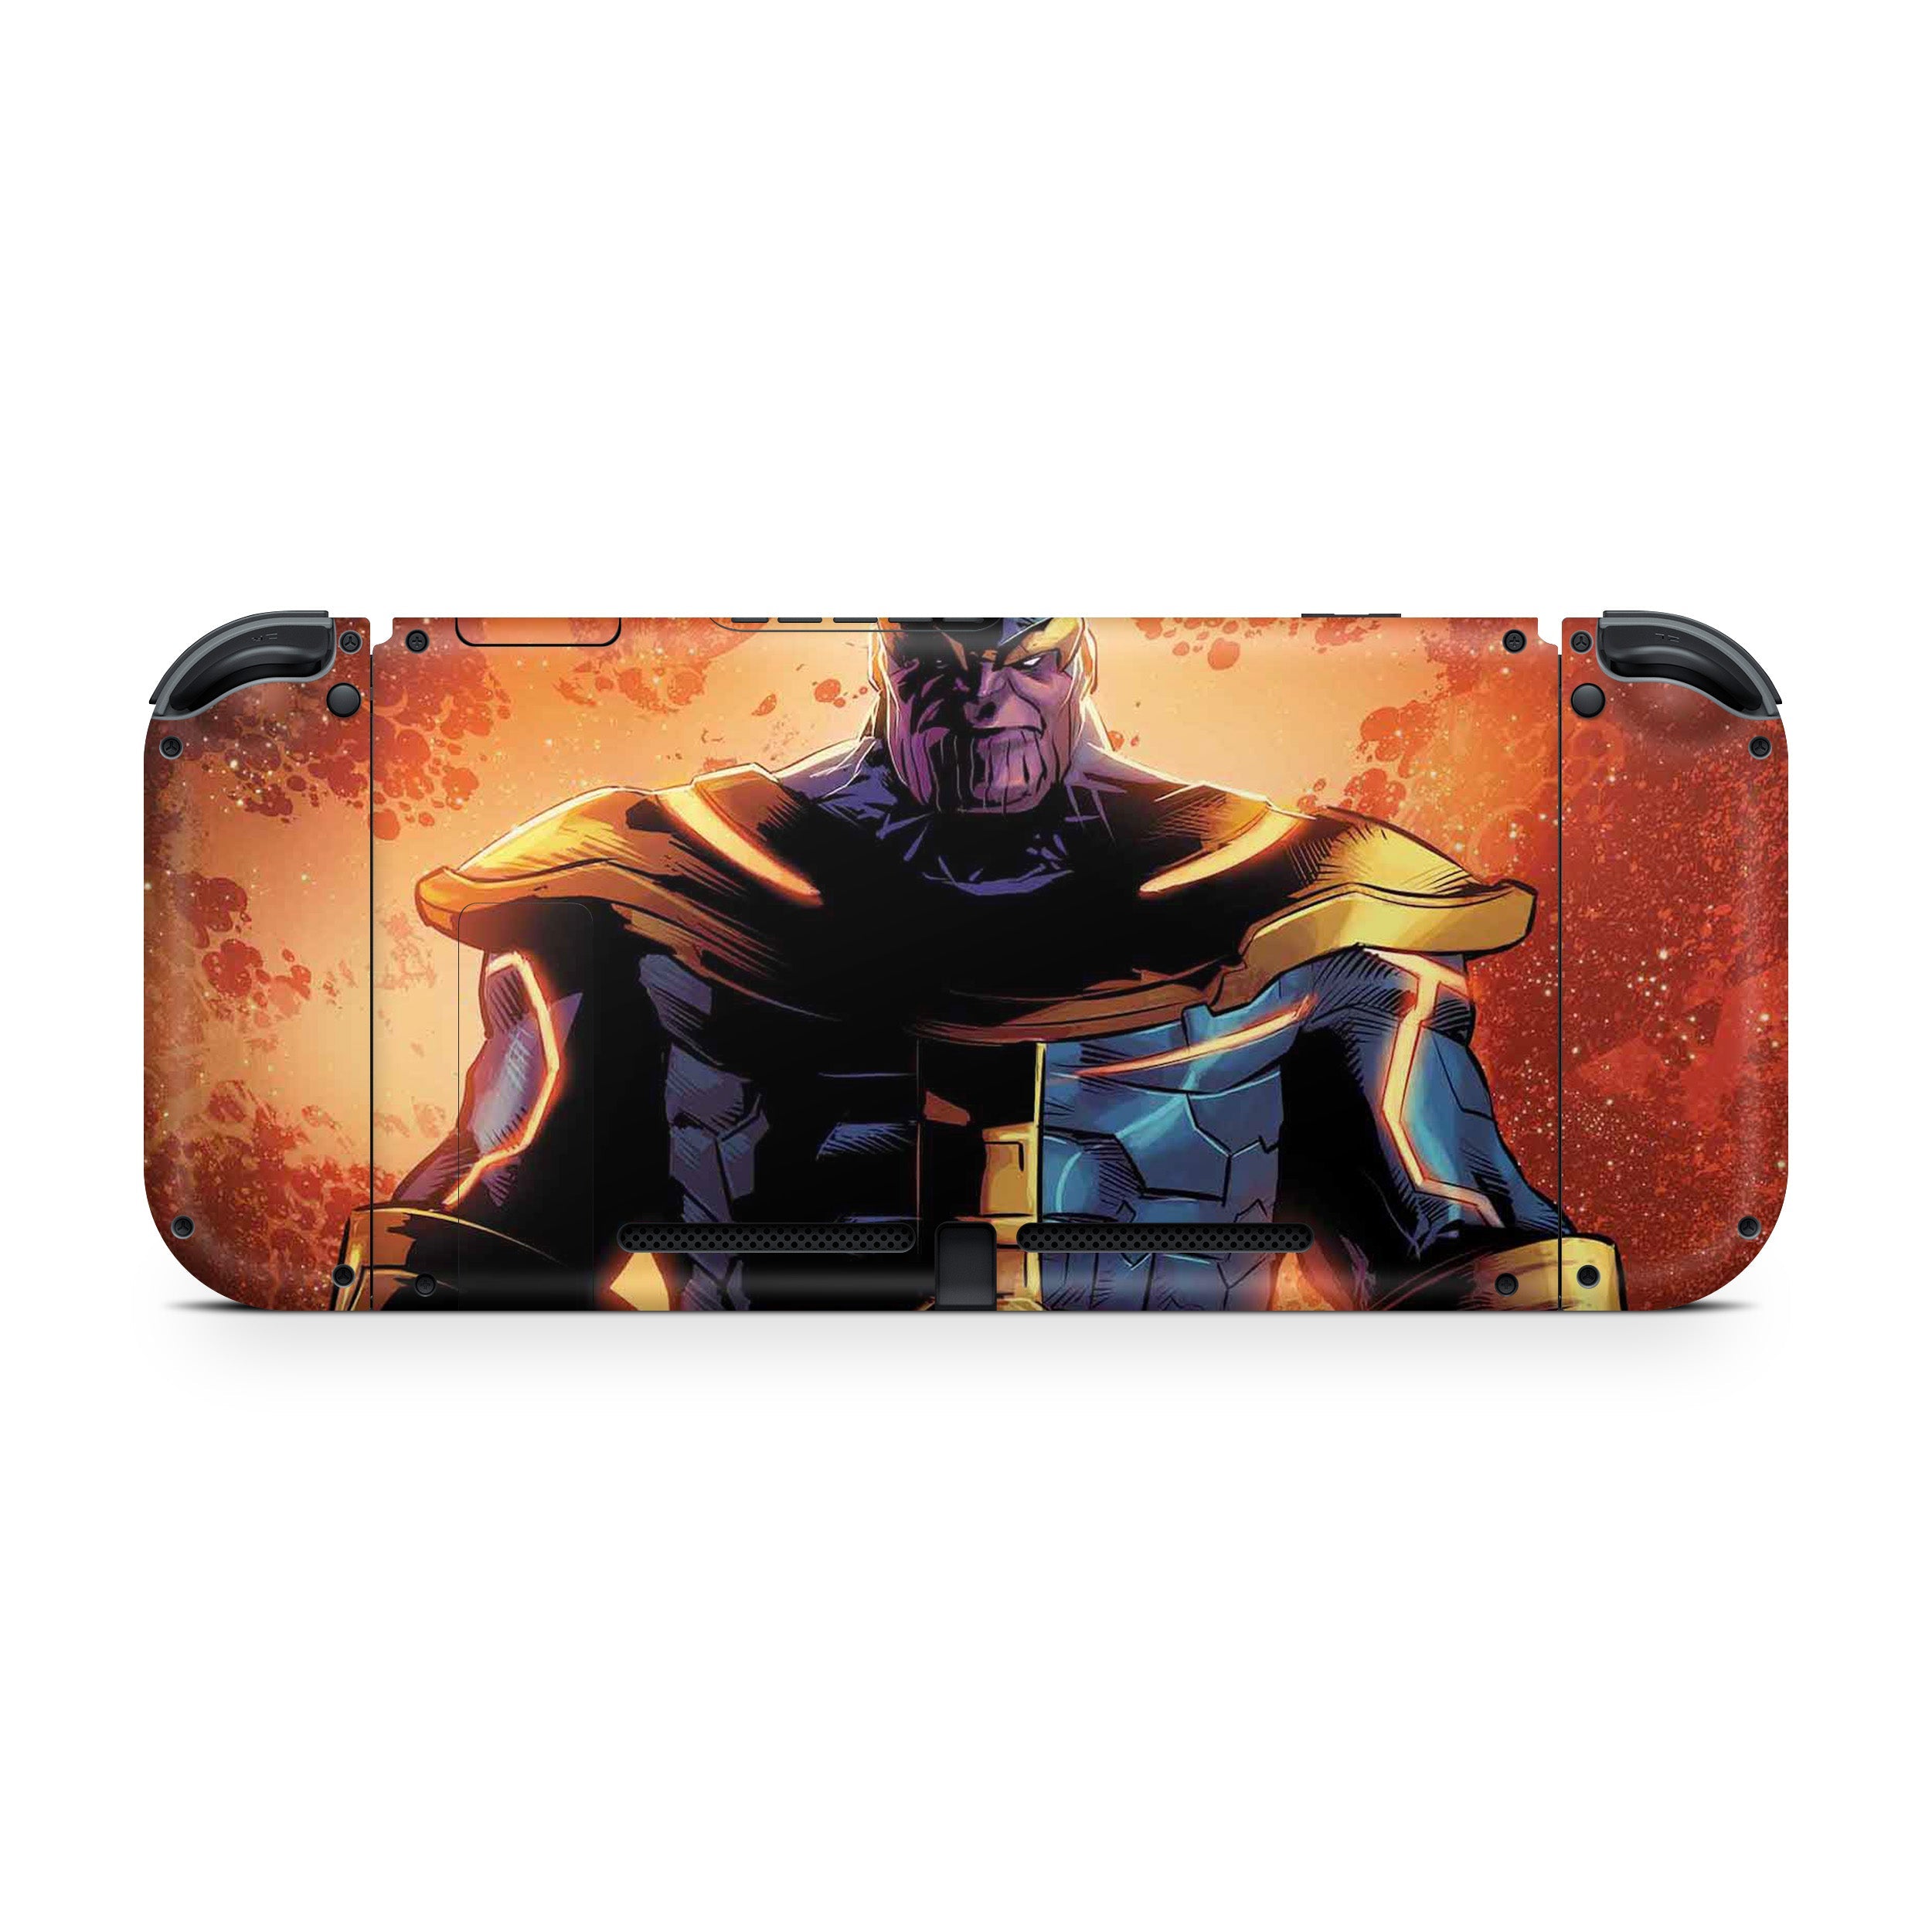 A video game skin featuring a Marvel Thanos design for the Nintendo Switch.